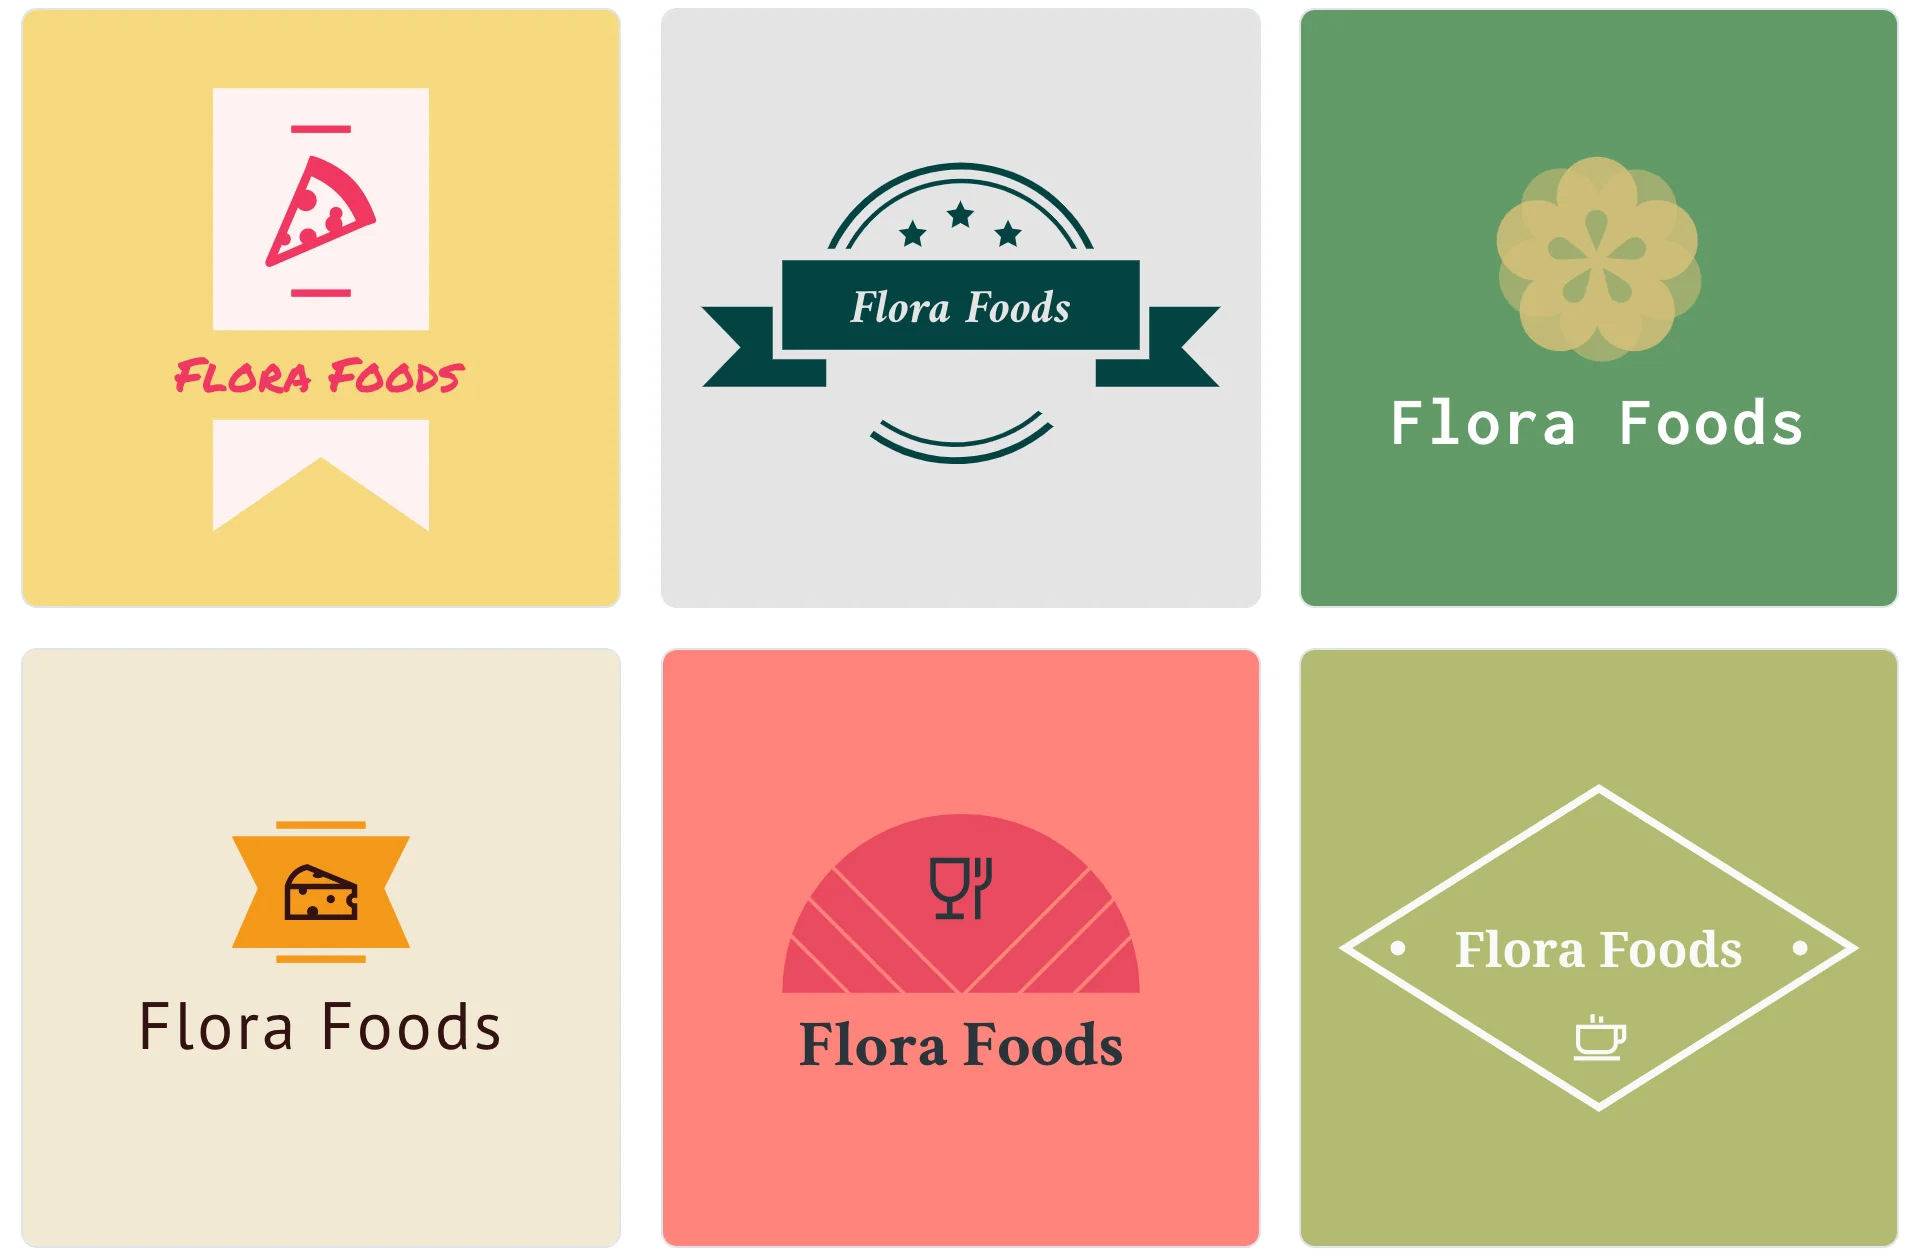 A grid of logo options for a food brand